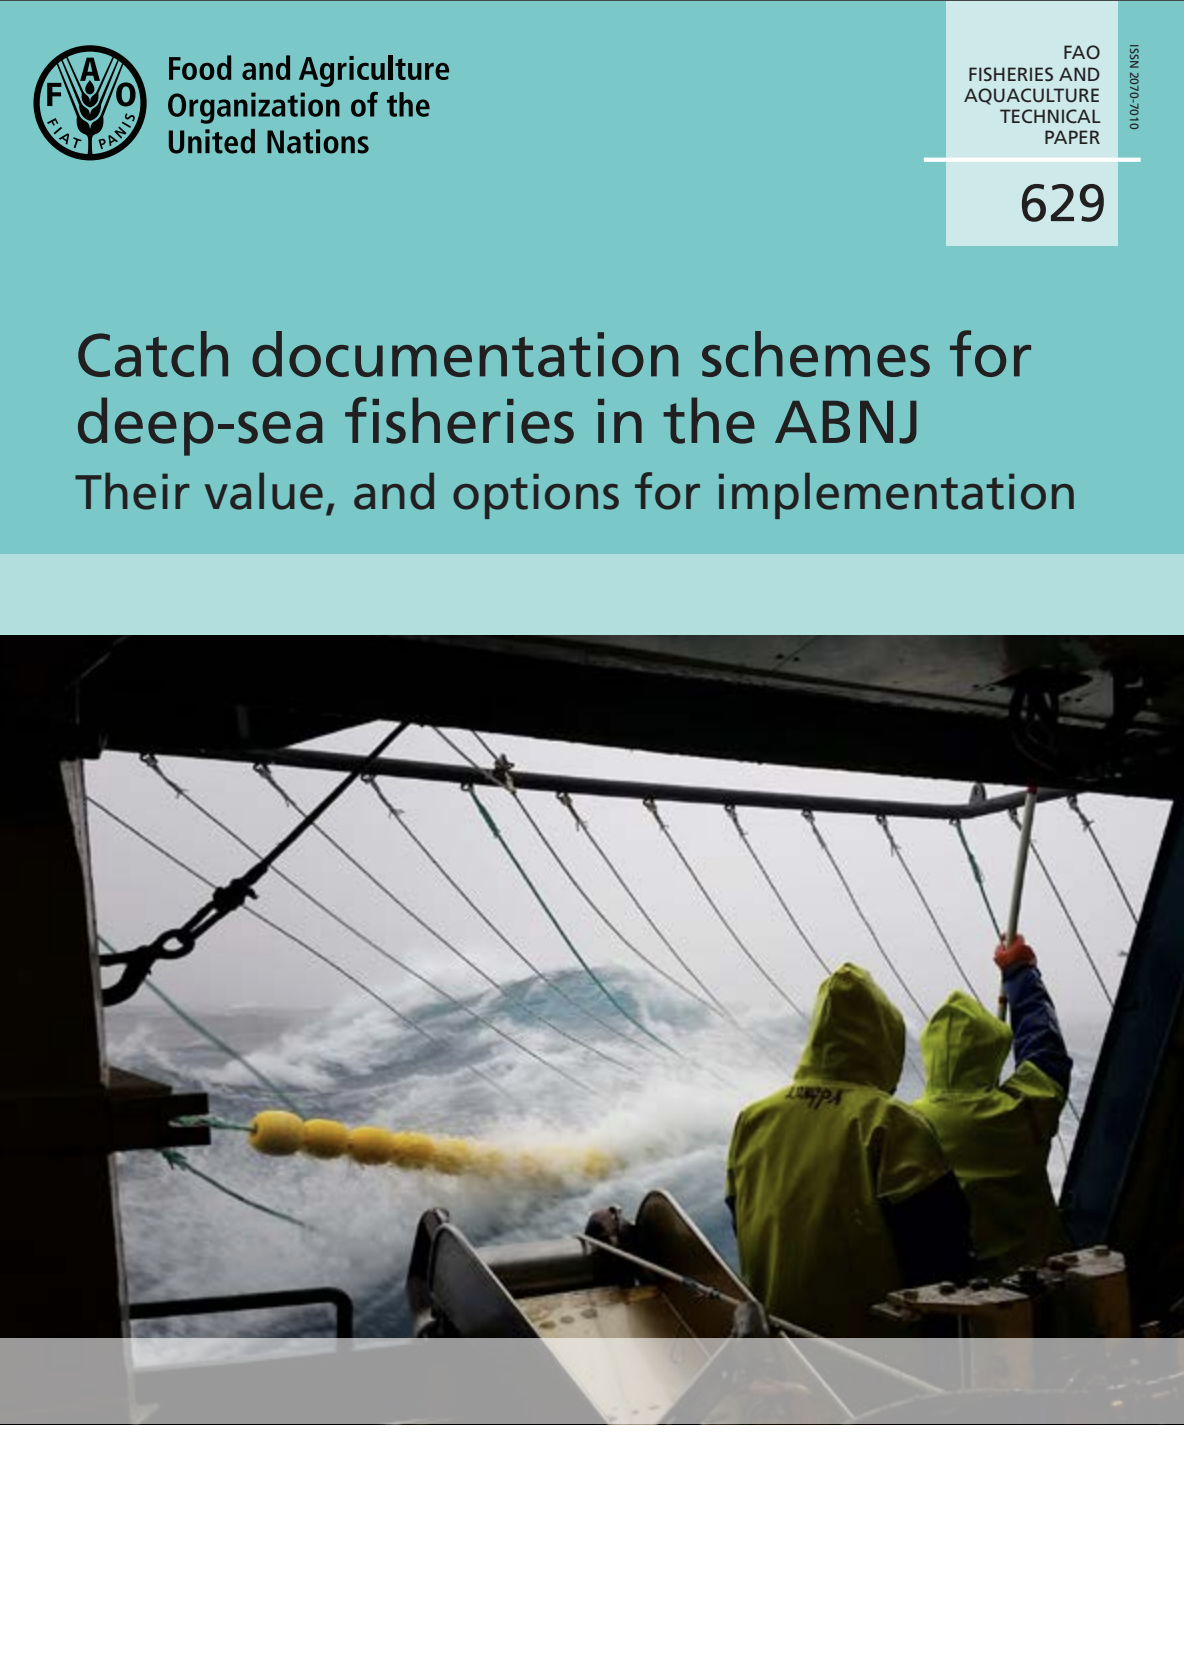 Catch documentation schemes for deep-seas fisheries in the ABNJ, their value and options for implementation